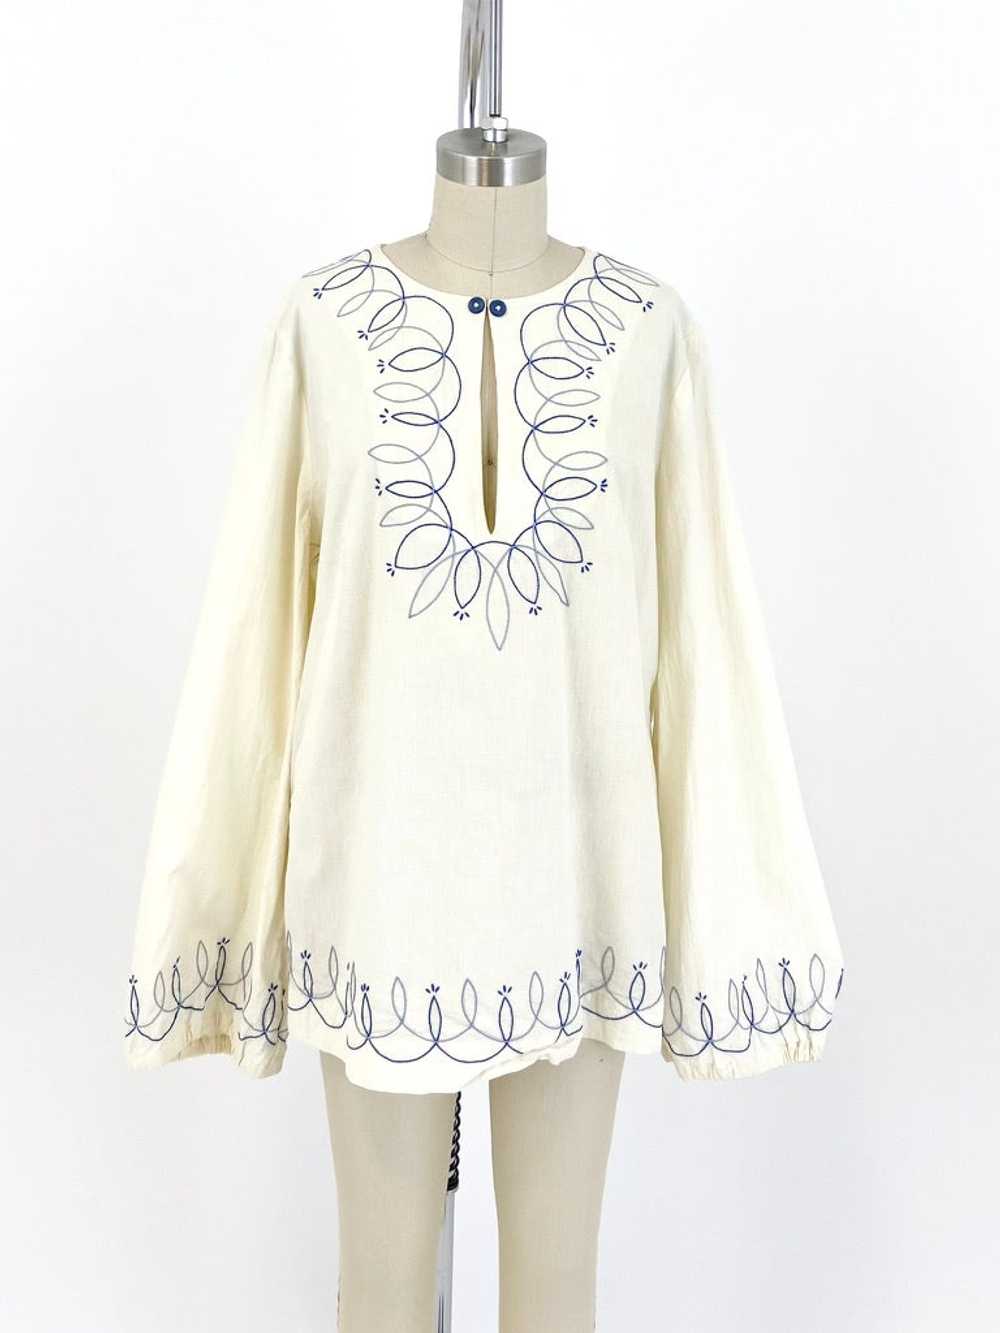 70s Embroidered Top - image 1